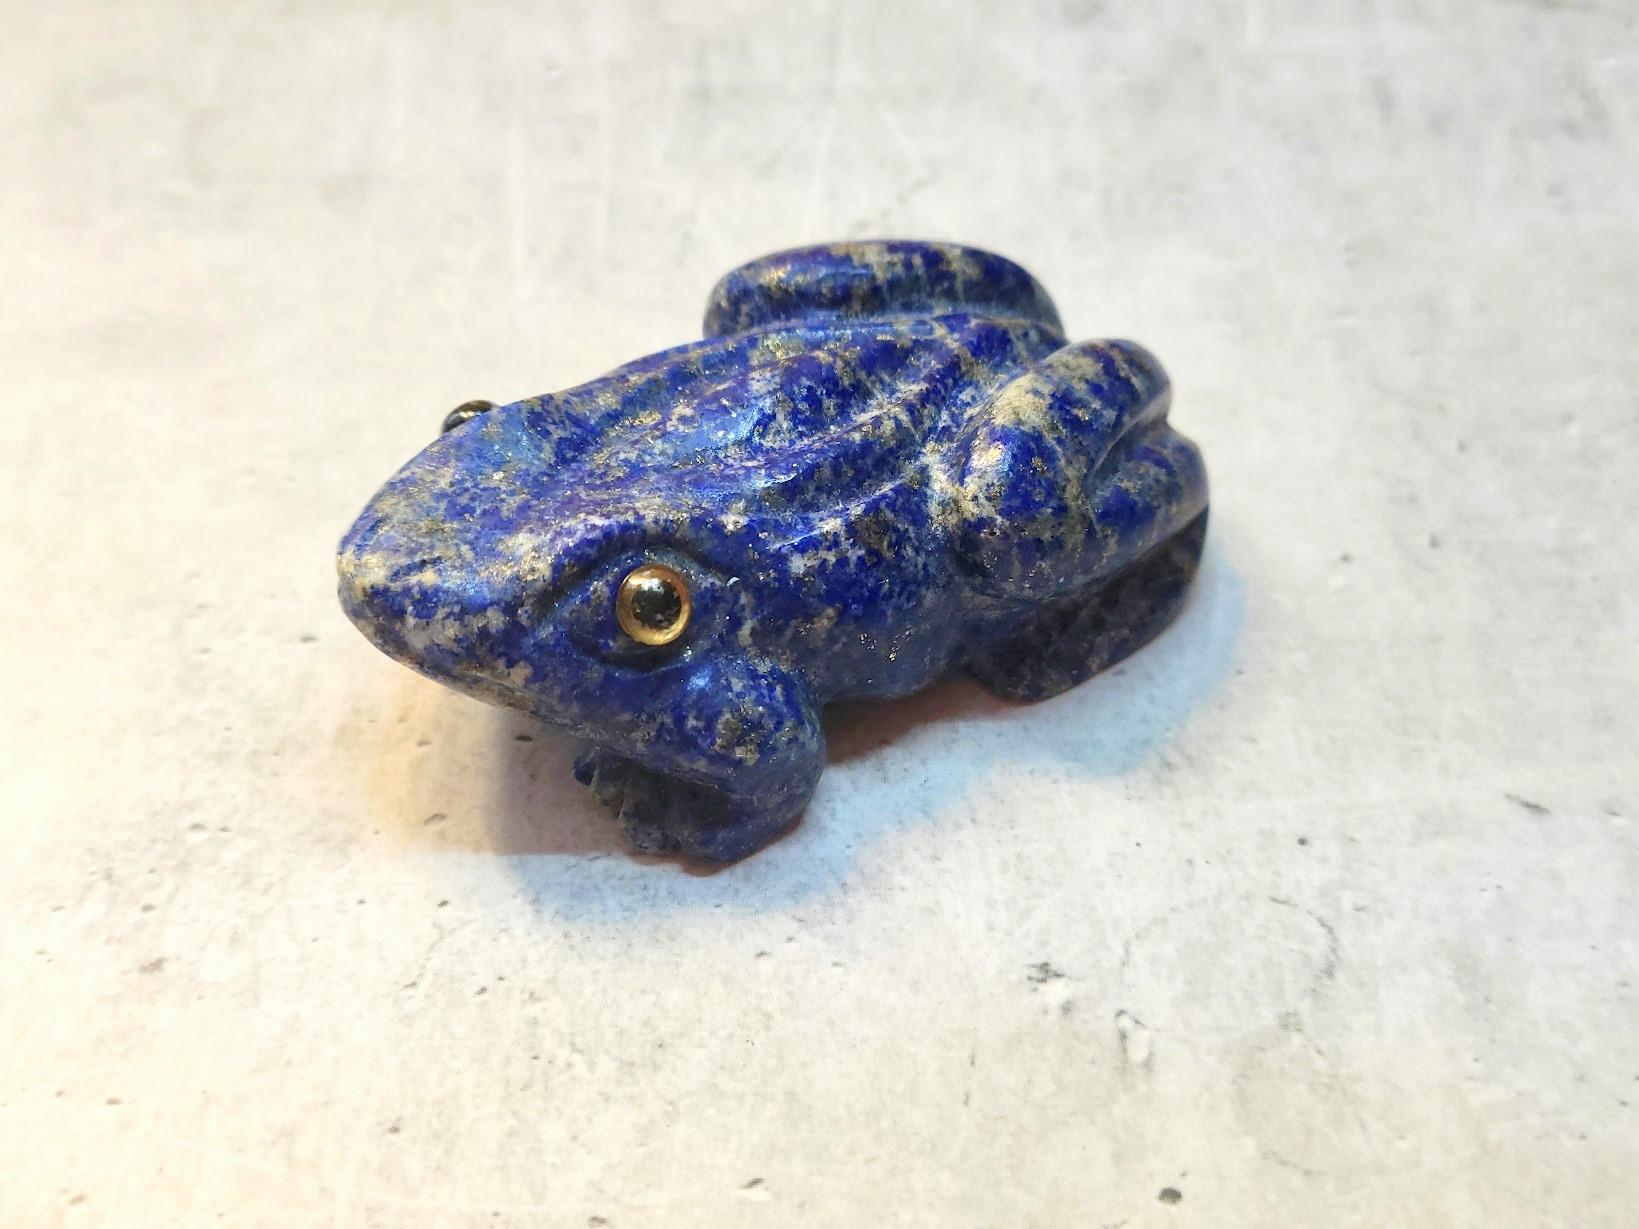 A stunning piece of accent decor handcrafted from the most beautiful natural lapis lazuli stone.

A wonderful frog carved from a single high-quality piece of lapis lazuli, with natural inclusions of golden pyrite. Amazing figurine! 
The frog